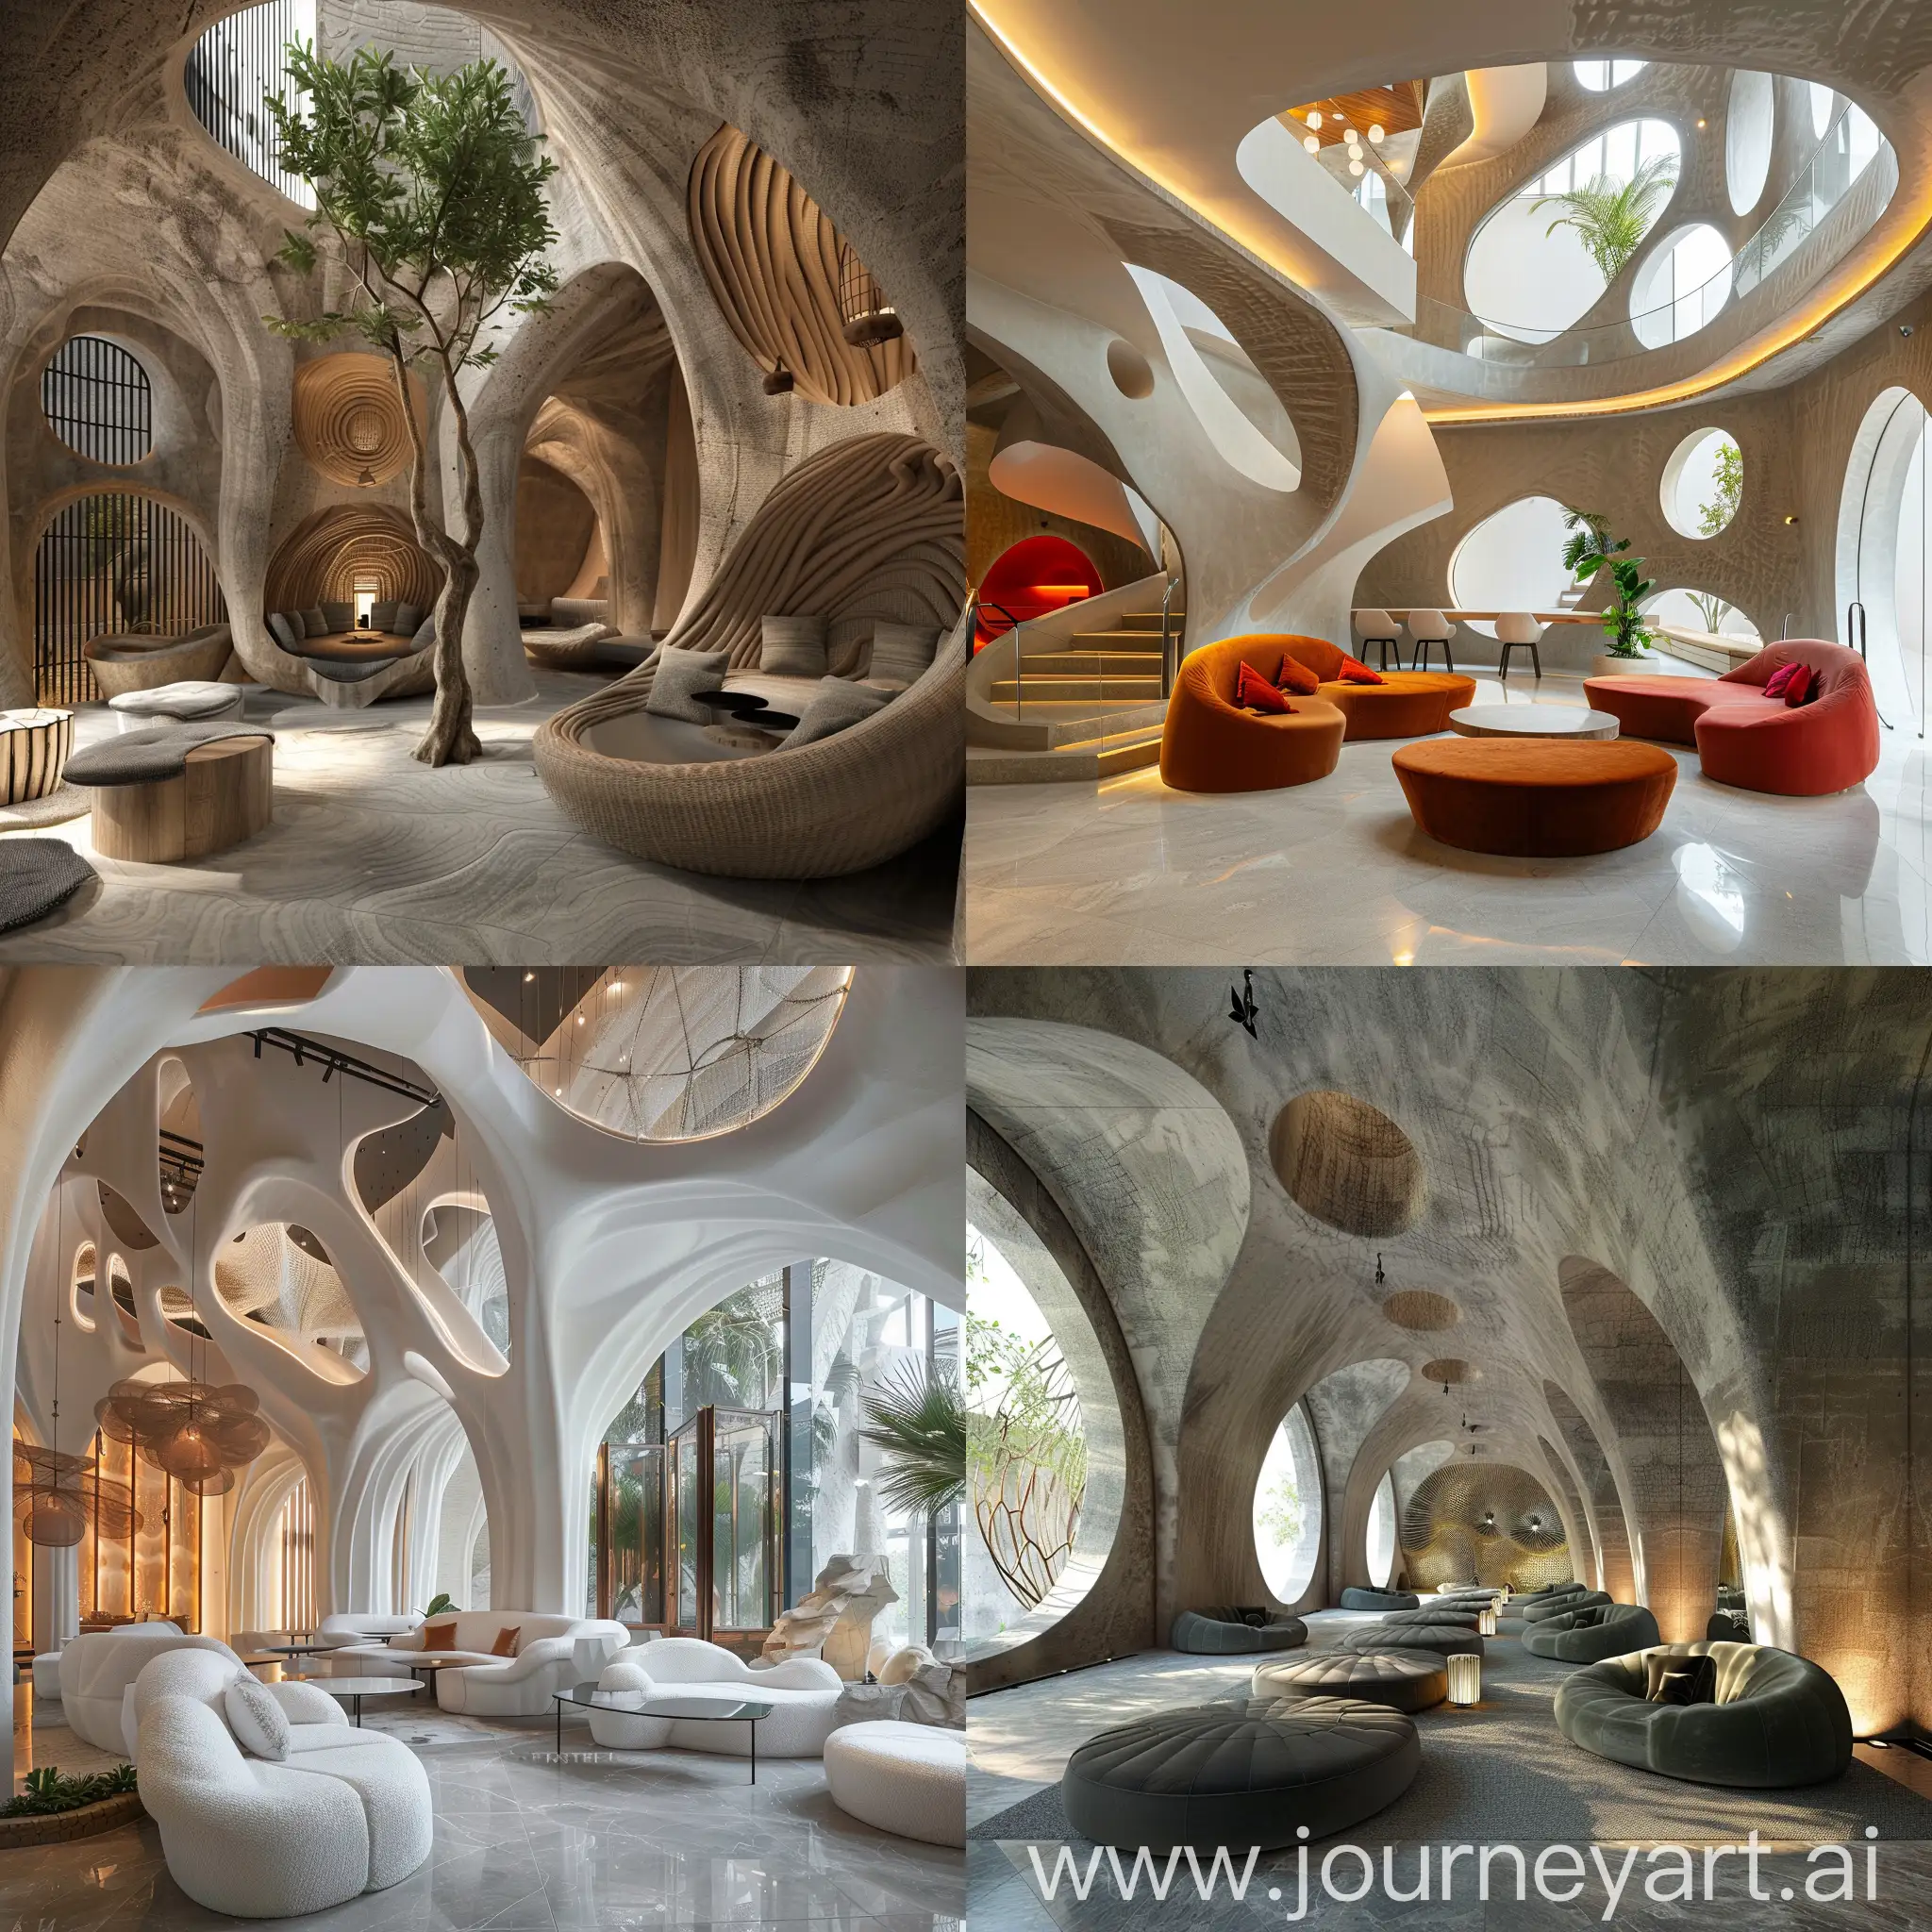 The interior design of the hotel, communal spaces inspired by the butterfly cocoon